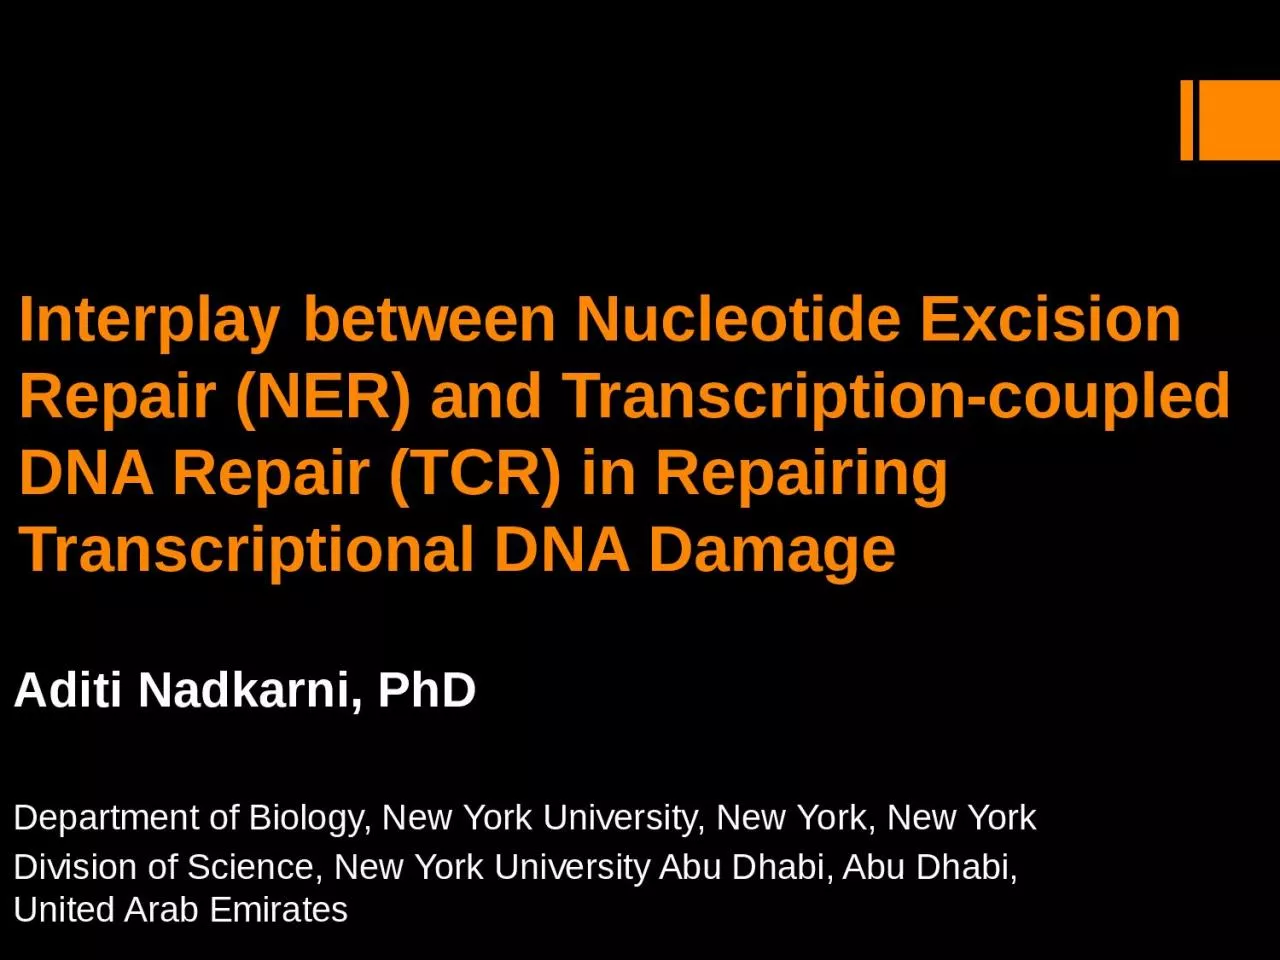 Interplay between Nucleotide Excision Repair (NER) and Transcription-coupled DNA Repair